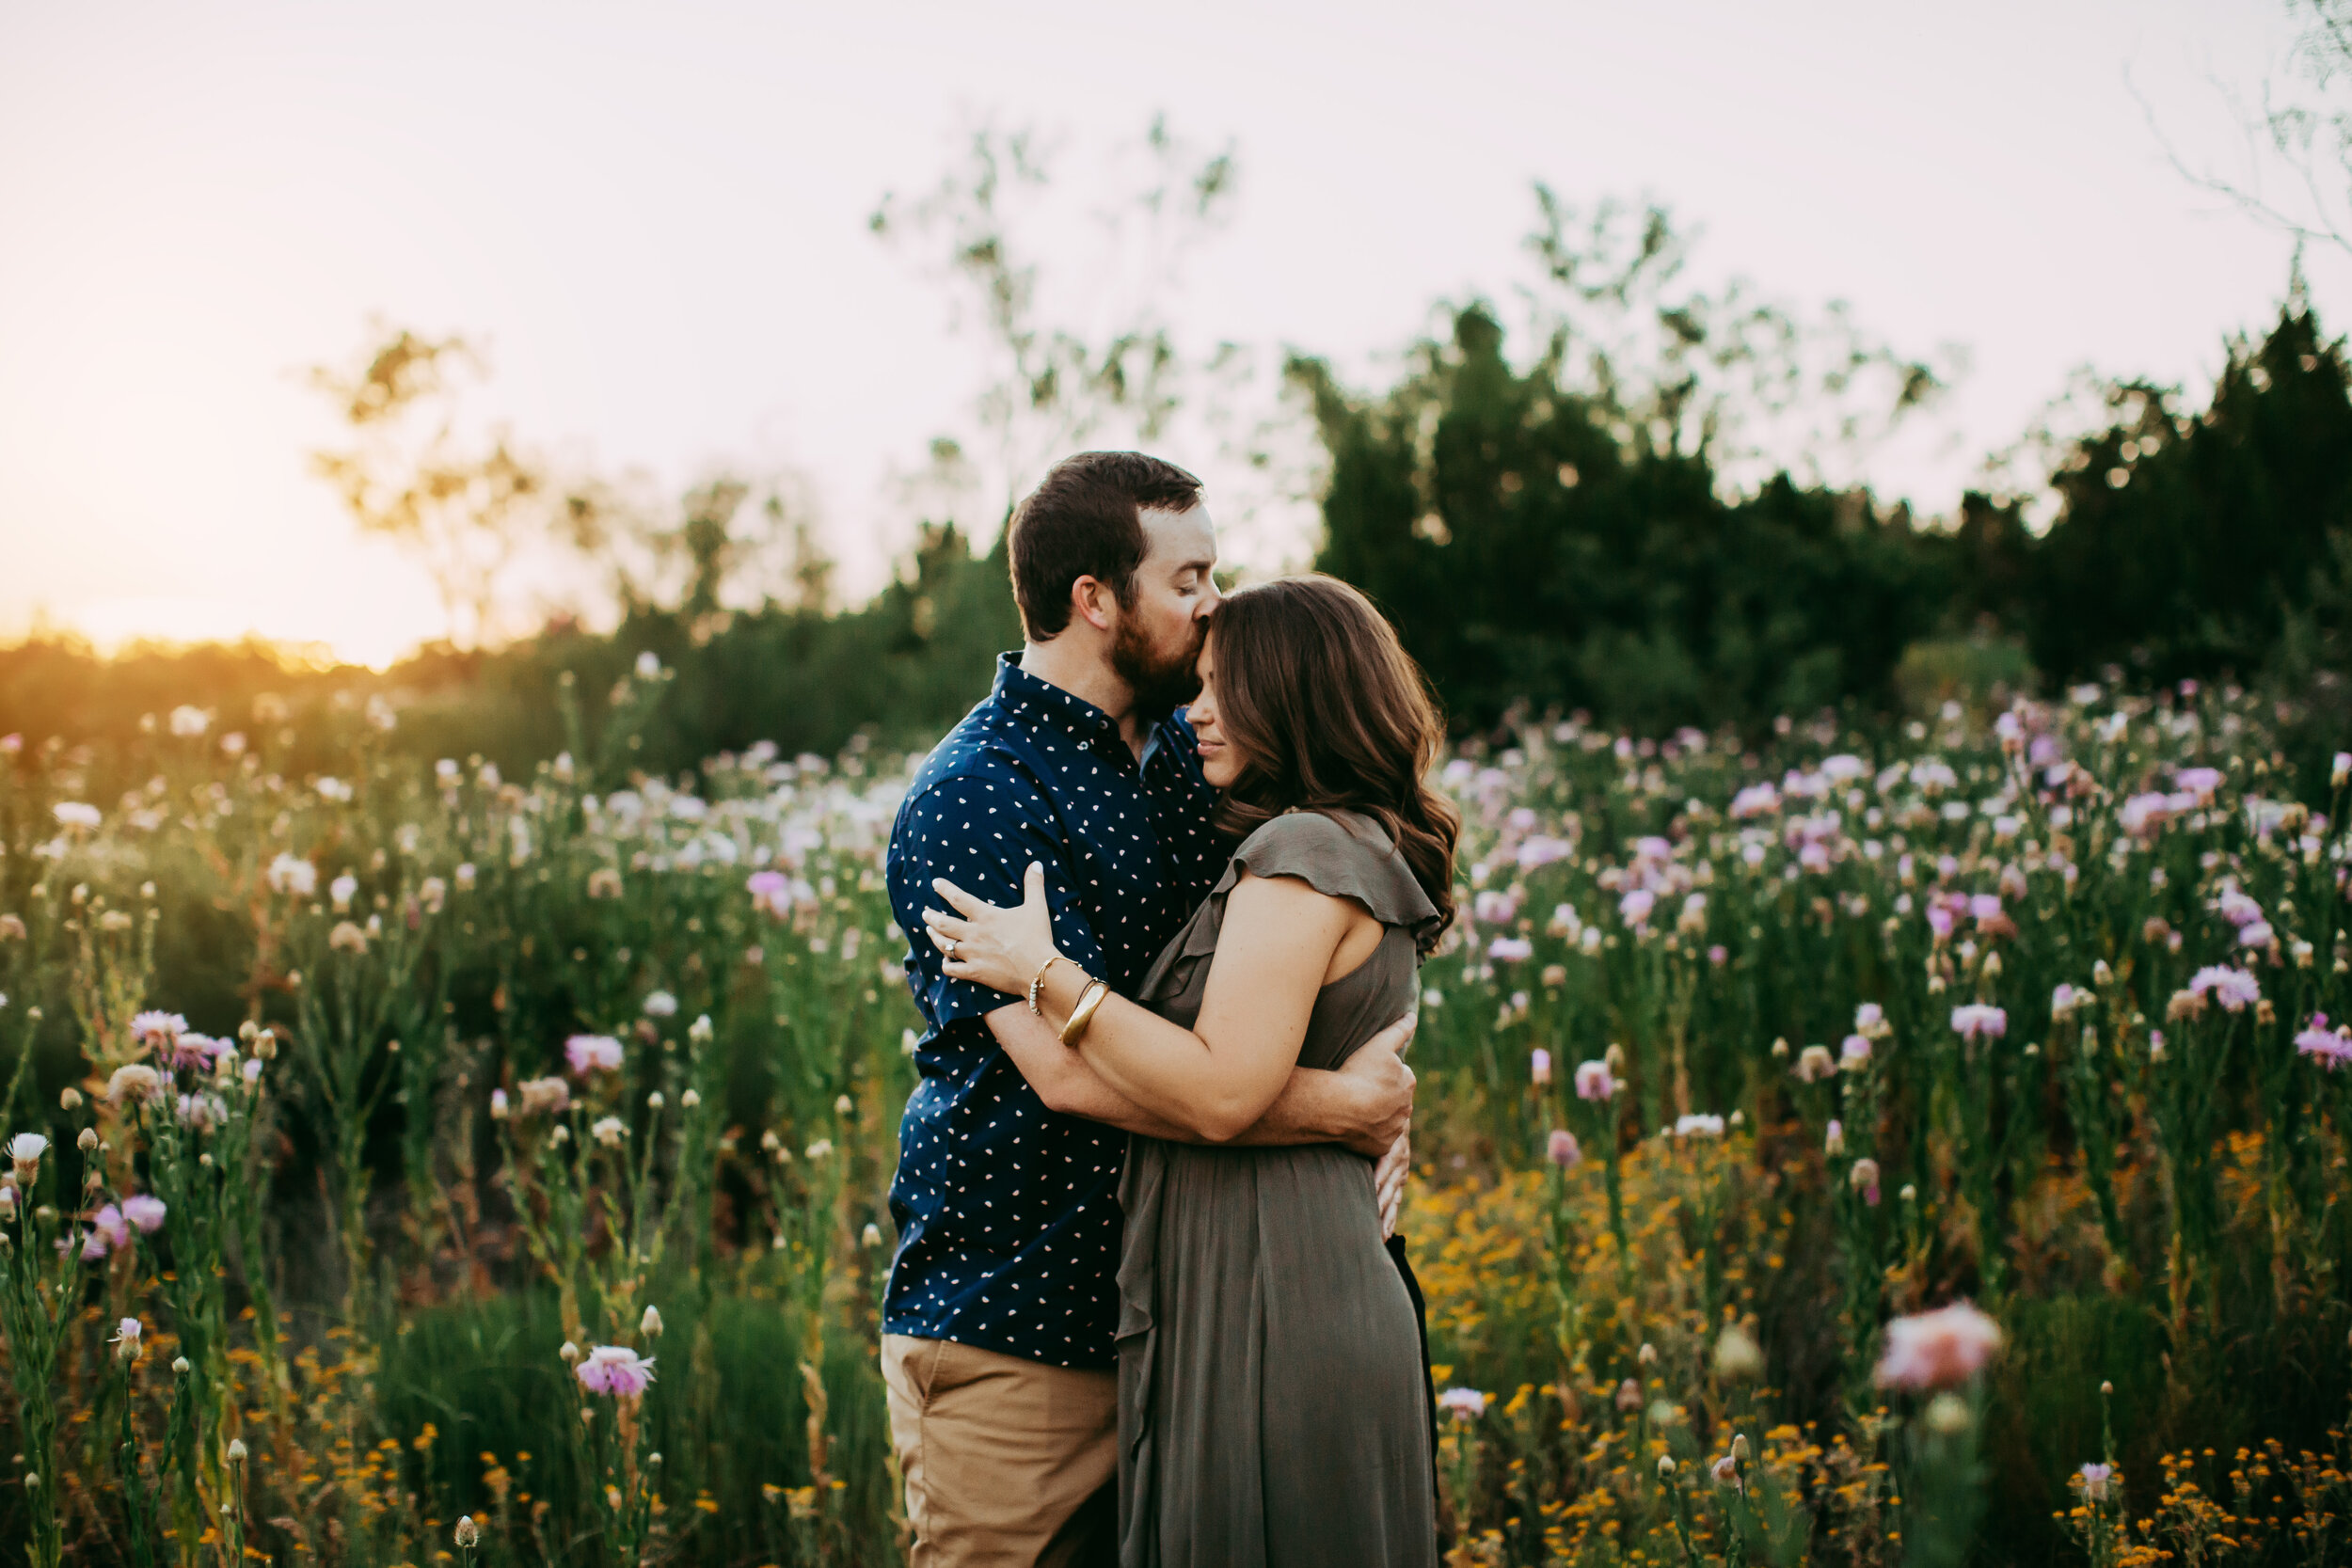  Mom and dad alone together in a field of wildflowers at sunset. Que the love story music! #tealawardphotography #texasfamilyphotographer #amarillophotographer #amarillofamilyphotographer #lifestylephotography #emotionalphotography #familyphotoshoot #family #lovingsiblings #purejoy #familyphotos #naturalfamilyinteraction 